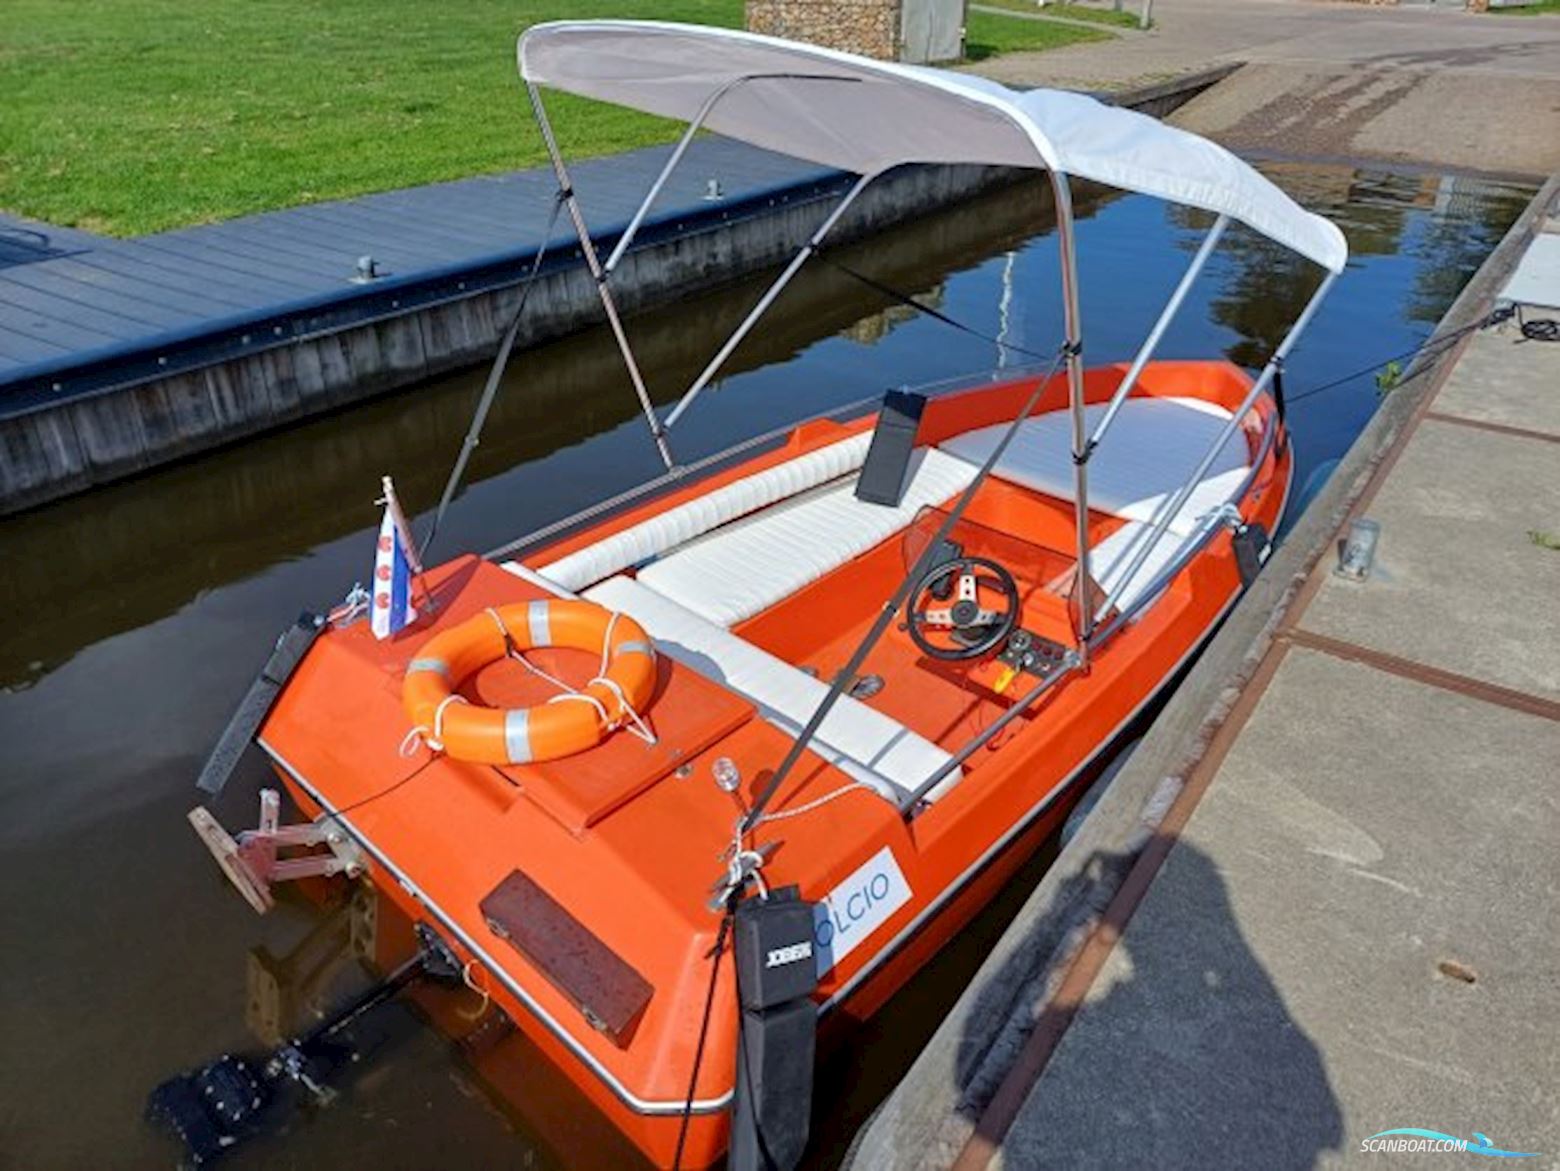 Solcio Jet SP Motor boat 1975, with Fiat engine, The Netherlands